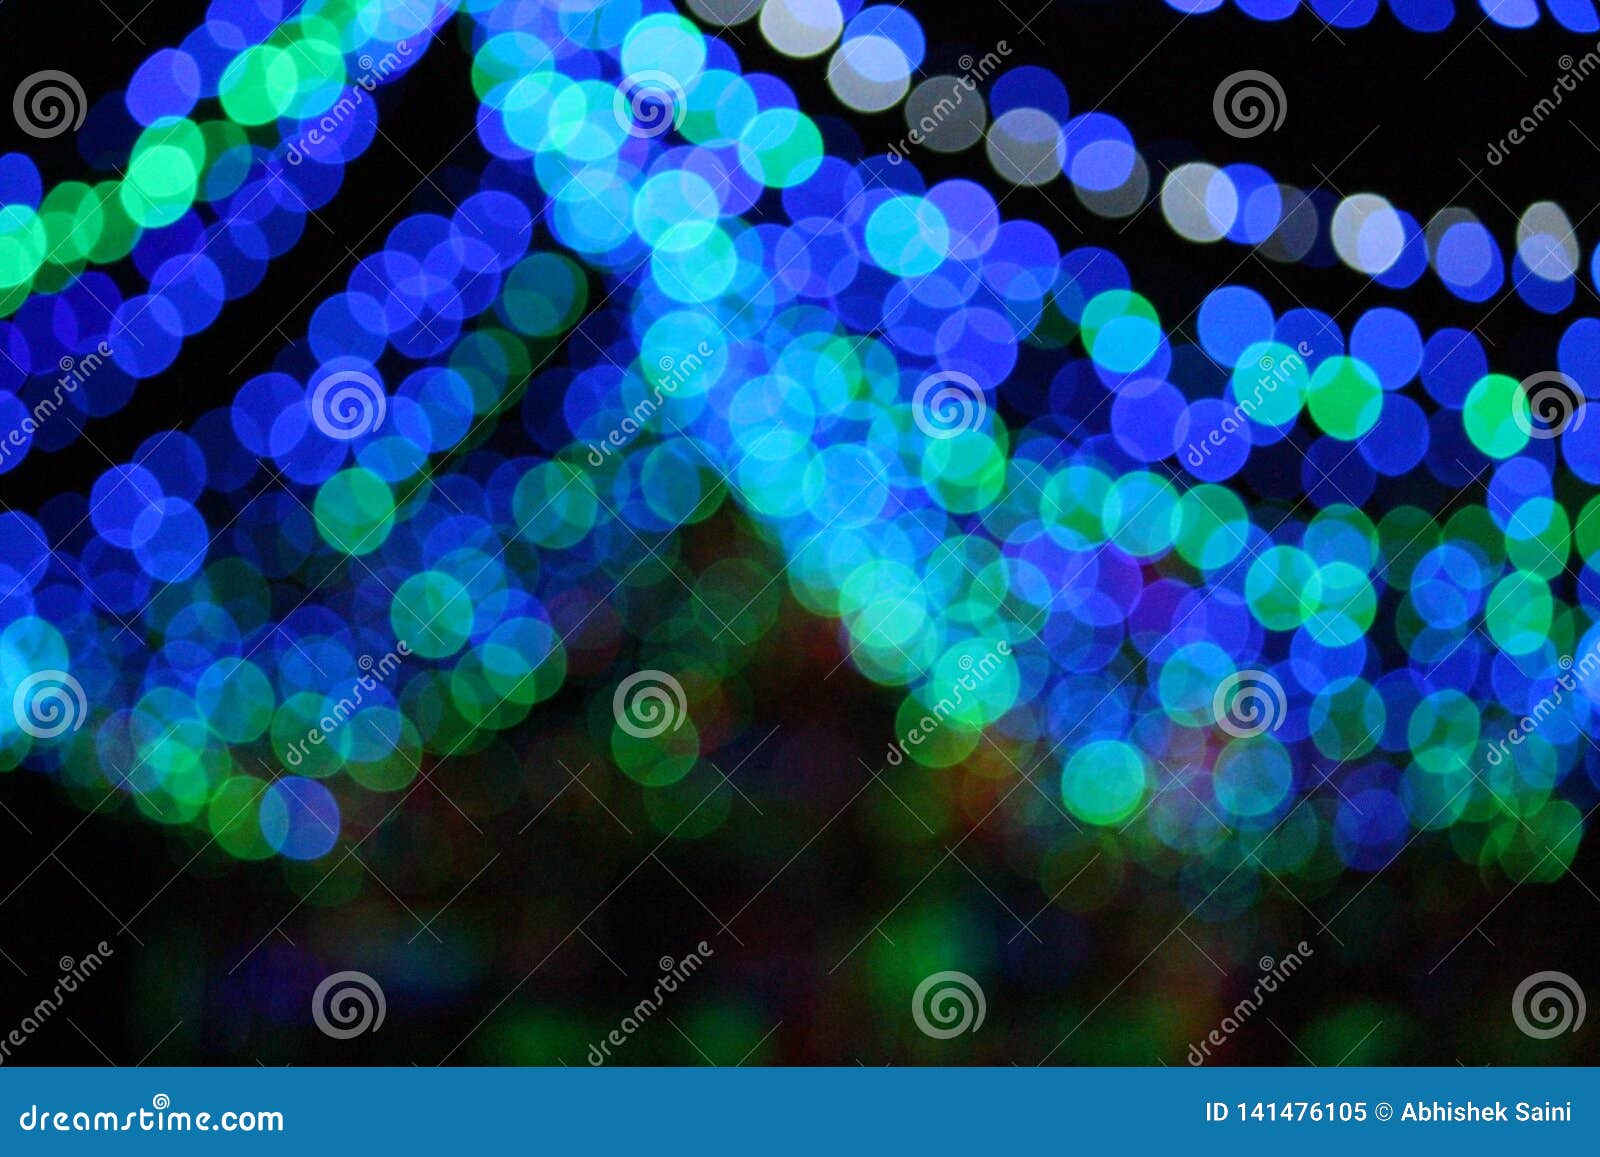 Abstract Light Bokeh Background, Diwali Lights, Blurry Lights, Glitter  Sparkle Stock Image - Image of decoration, beautiful: 141476105